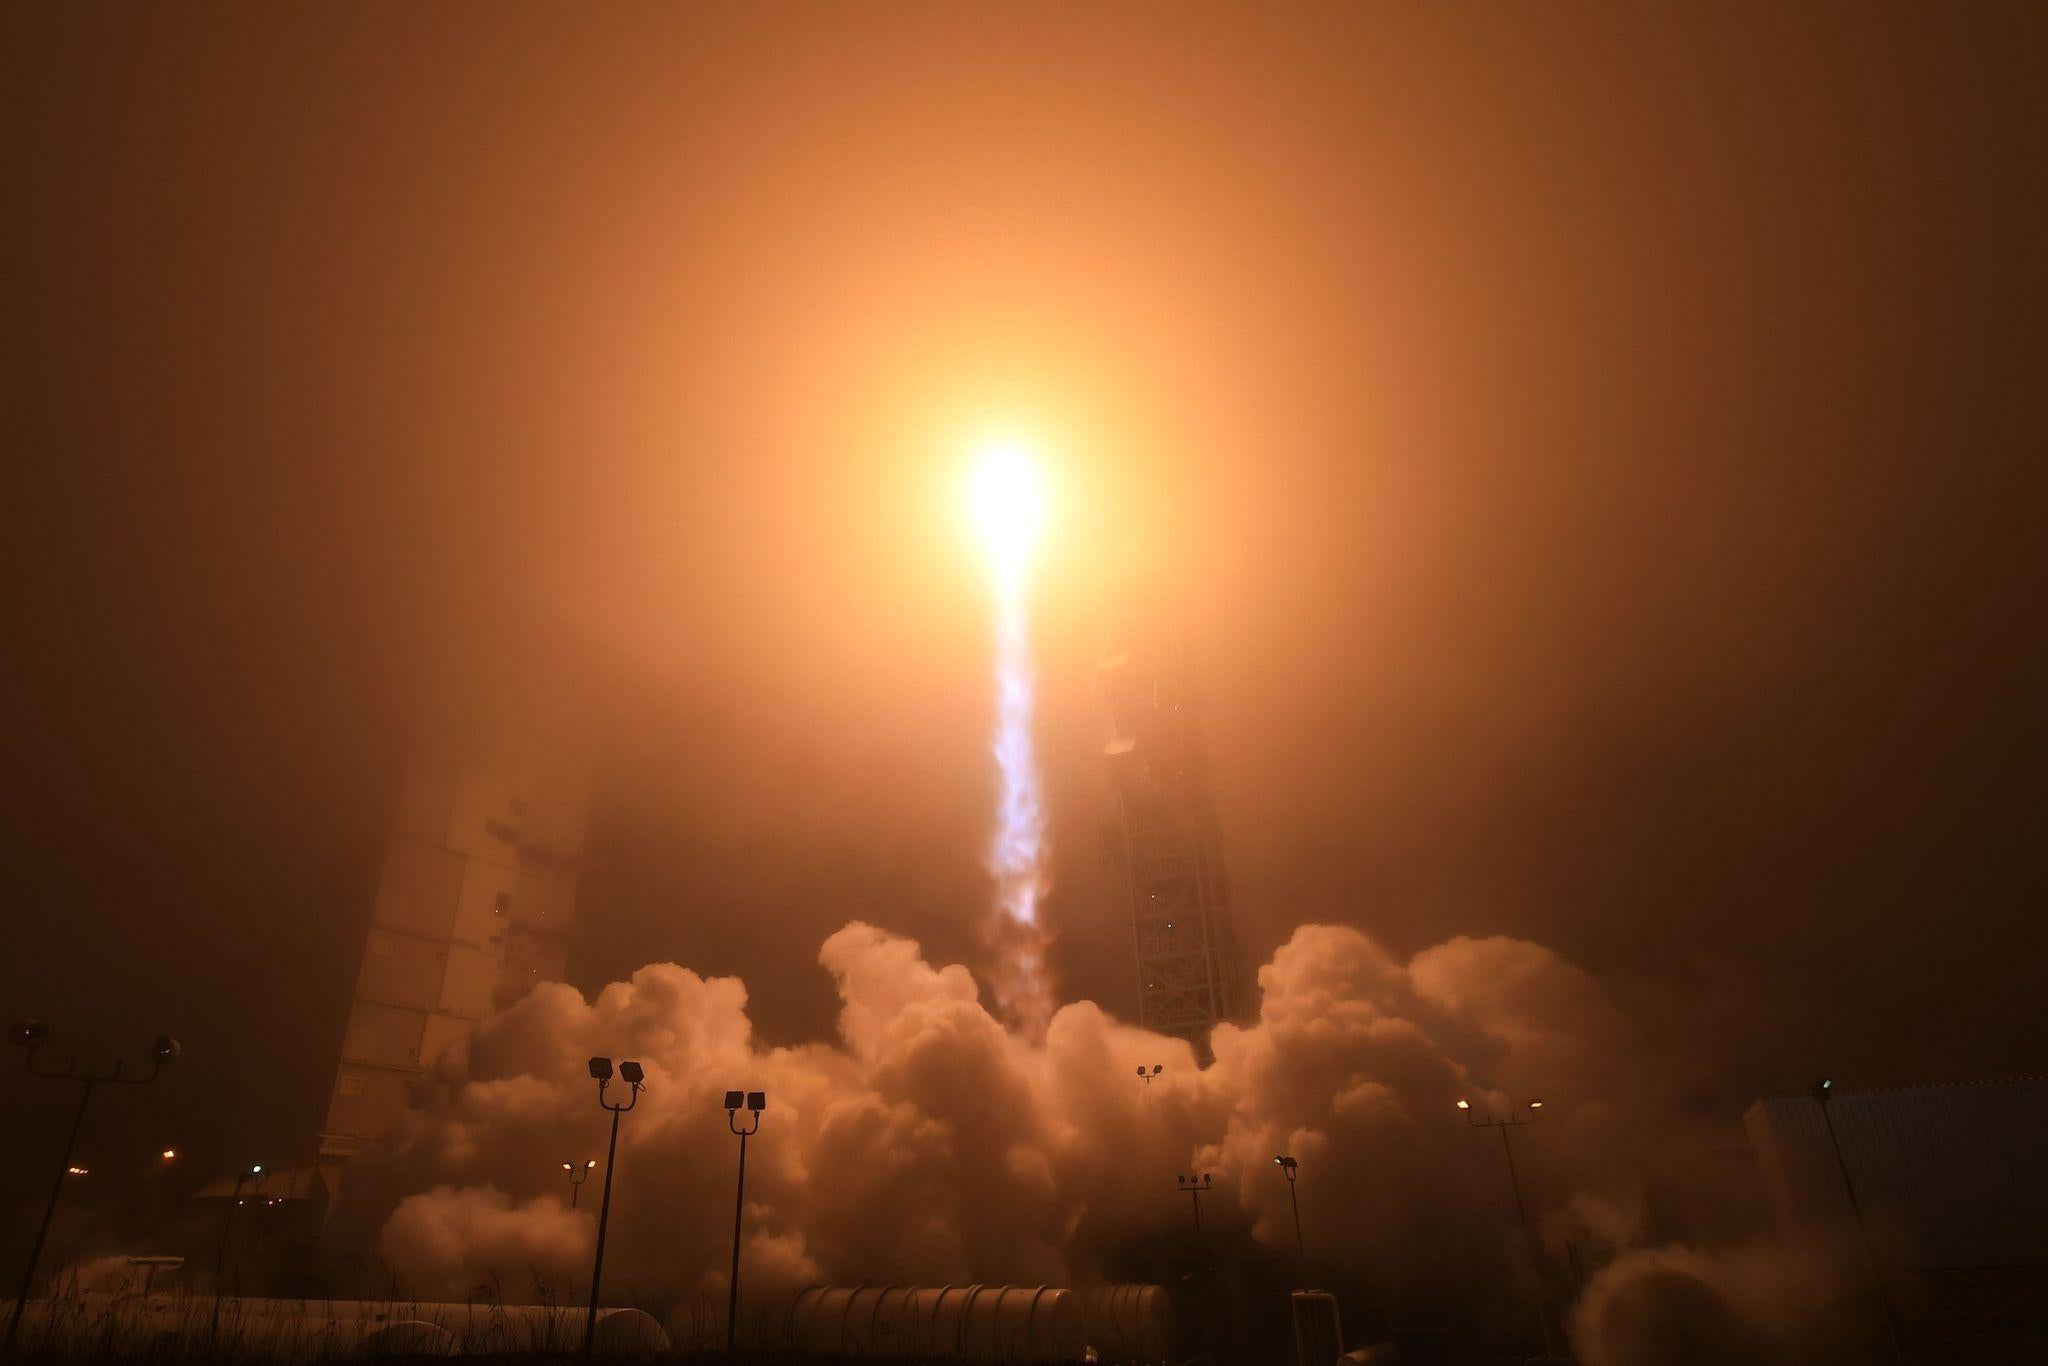 The NASA InSight spacecraft launches onboard a United Launch Alliance Atlas-V rocket on May 5, 2018, from Vandenberg Air Force Base in California